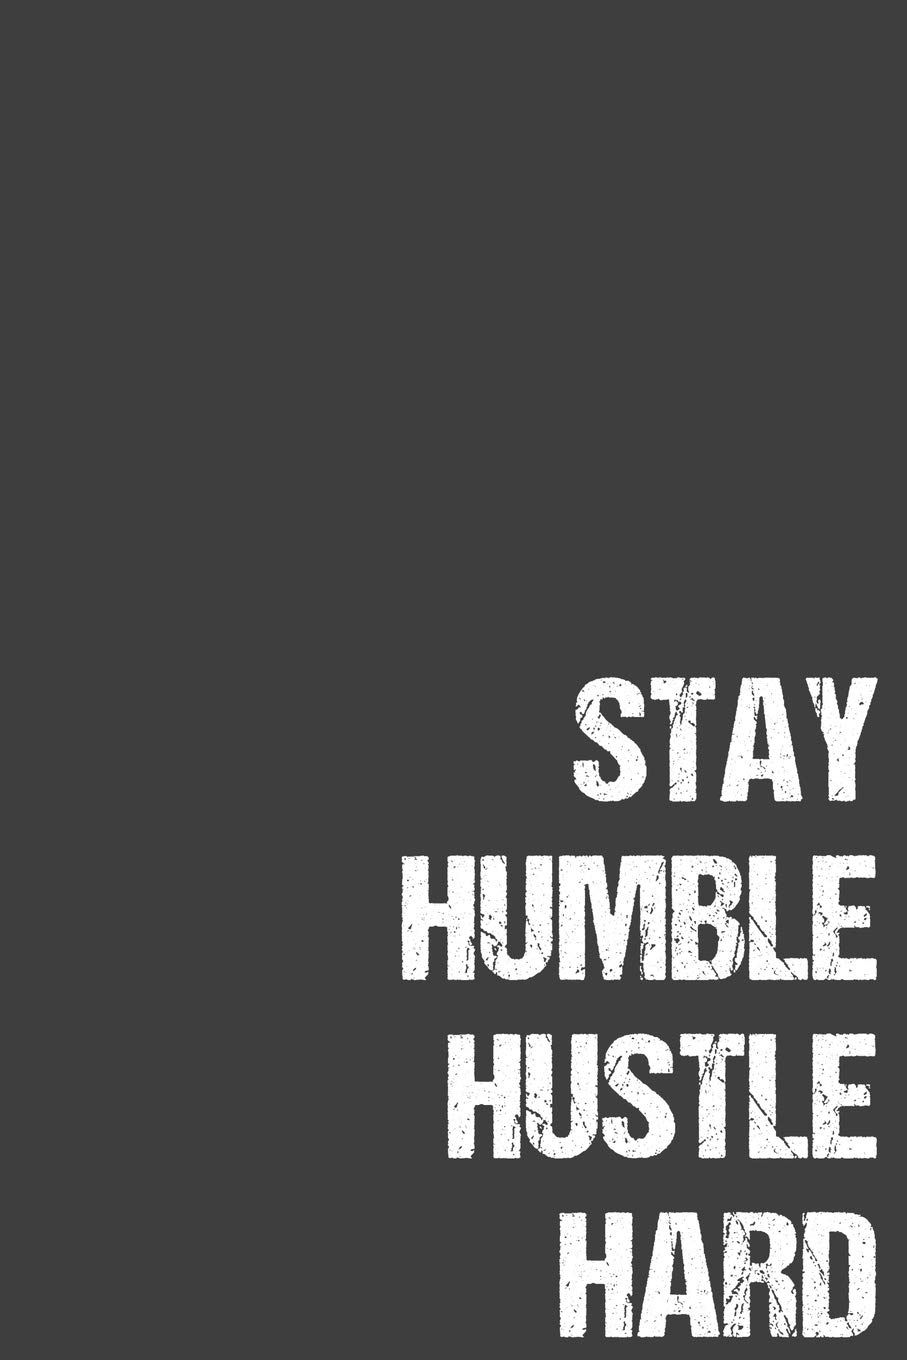 Maybe some inspirational text to help complete your wall wallpaper  phonewallpaper  Humble quotes Stay humble quotes Humble